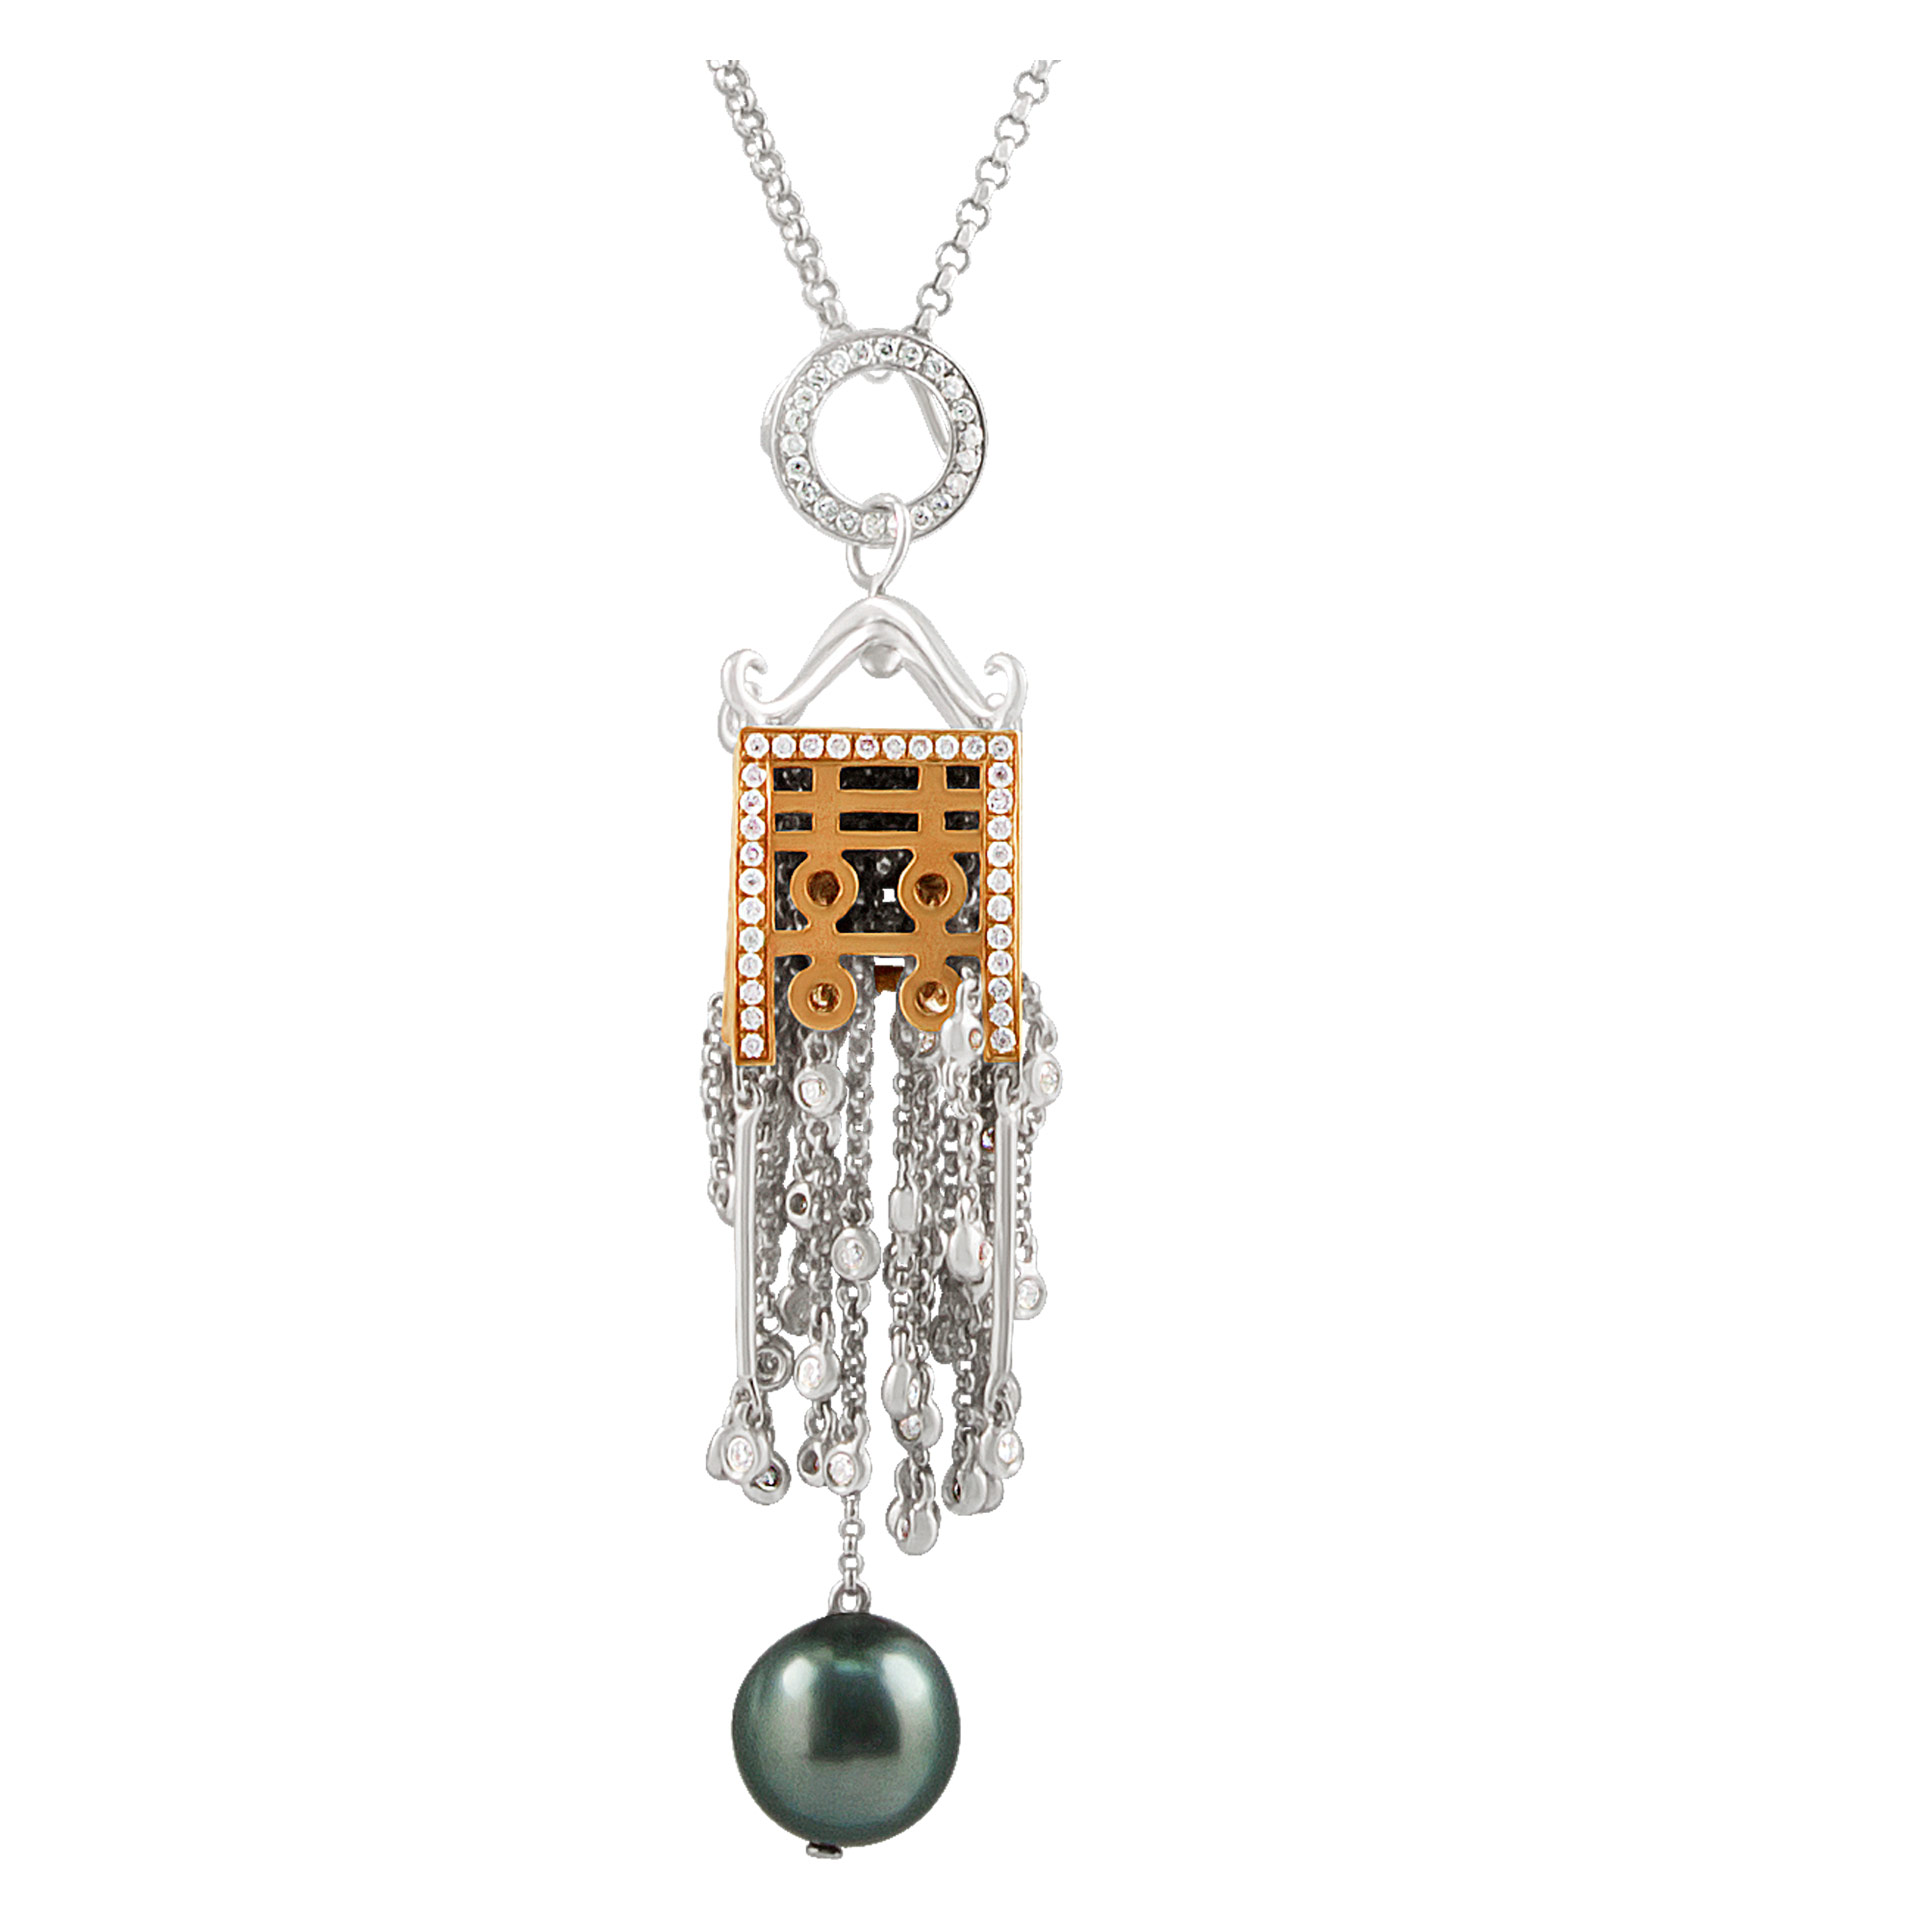 Chinese lantern necklace in 18k rose and white gold